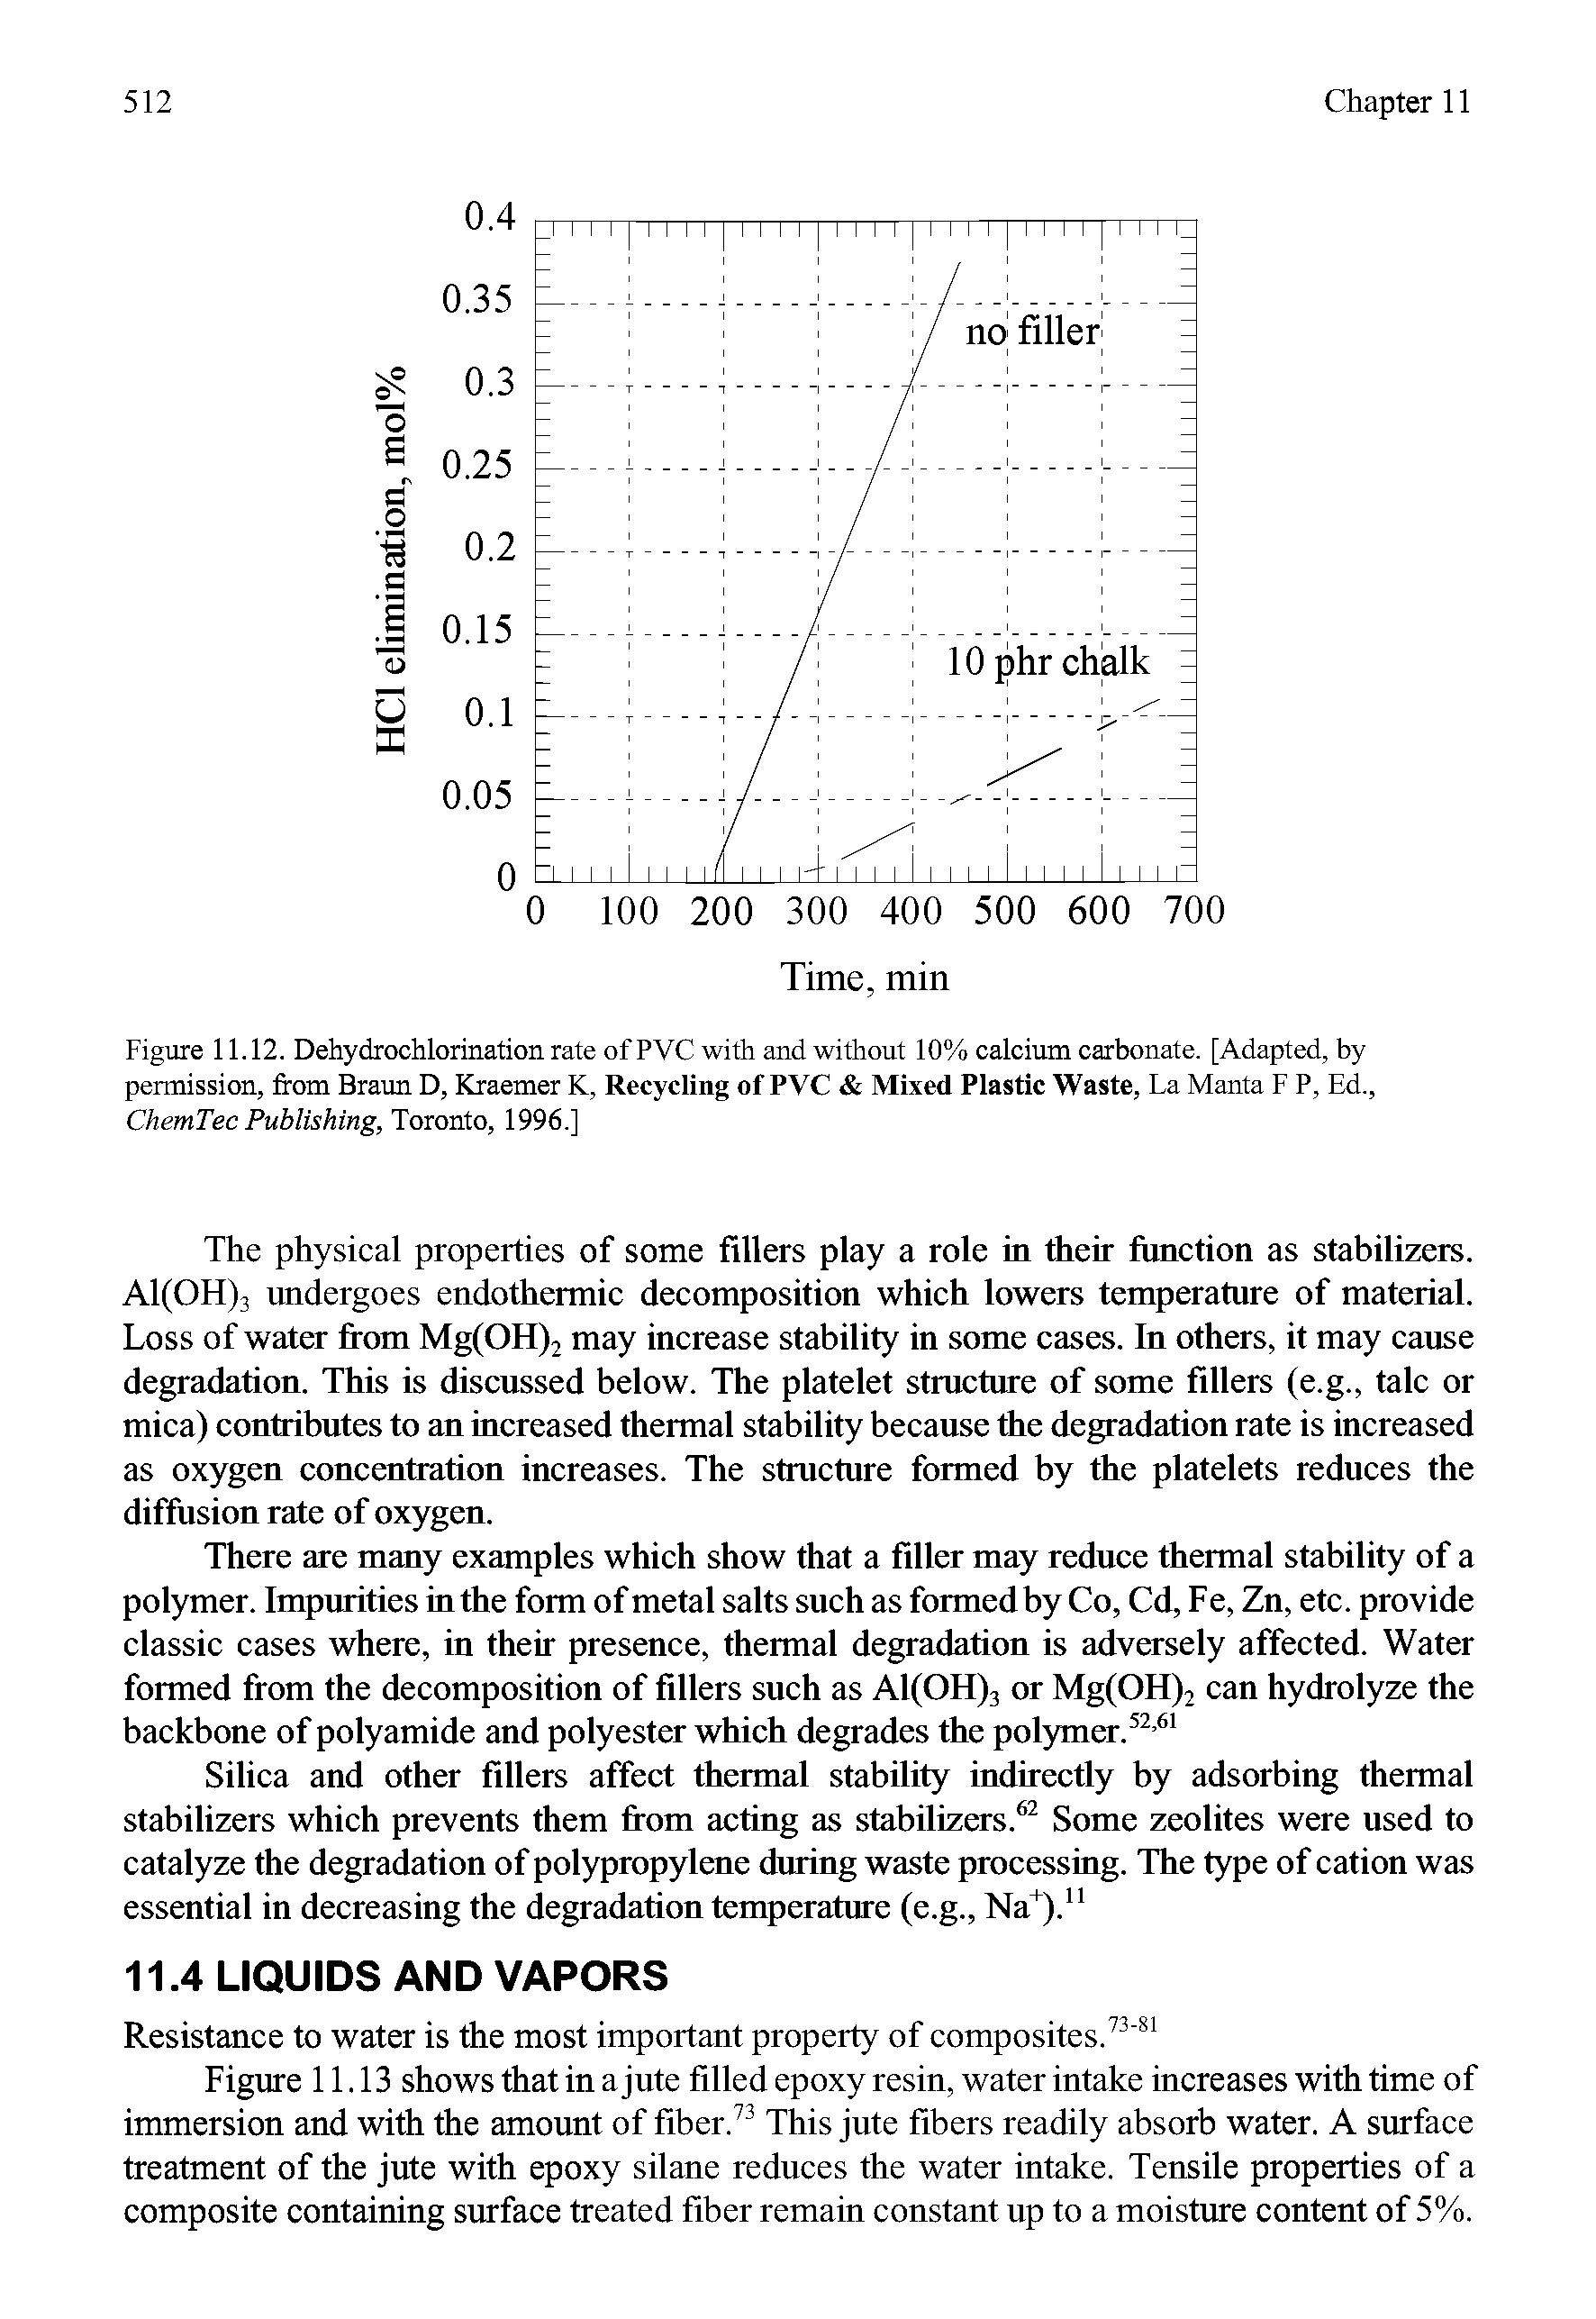 Figure 11.12. Dehydrochlorination rate of PVC with and without 10% calcium carbonate. [Adapted, by permission, from Braun D, Kraemer K, Recycling of PVC Mixed Plastic Waste, La Manta F P, Ed., ChemTec Publishing, Toronto, 1996.]...